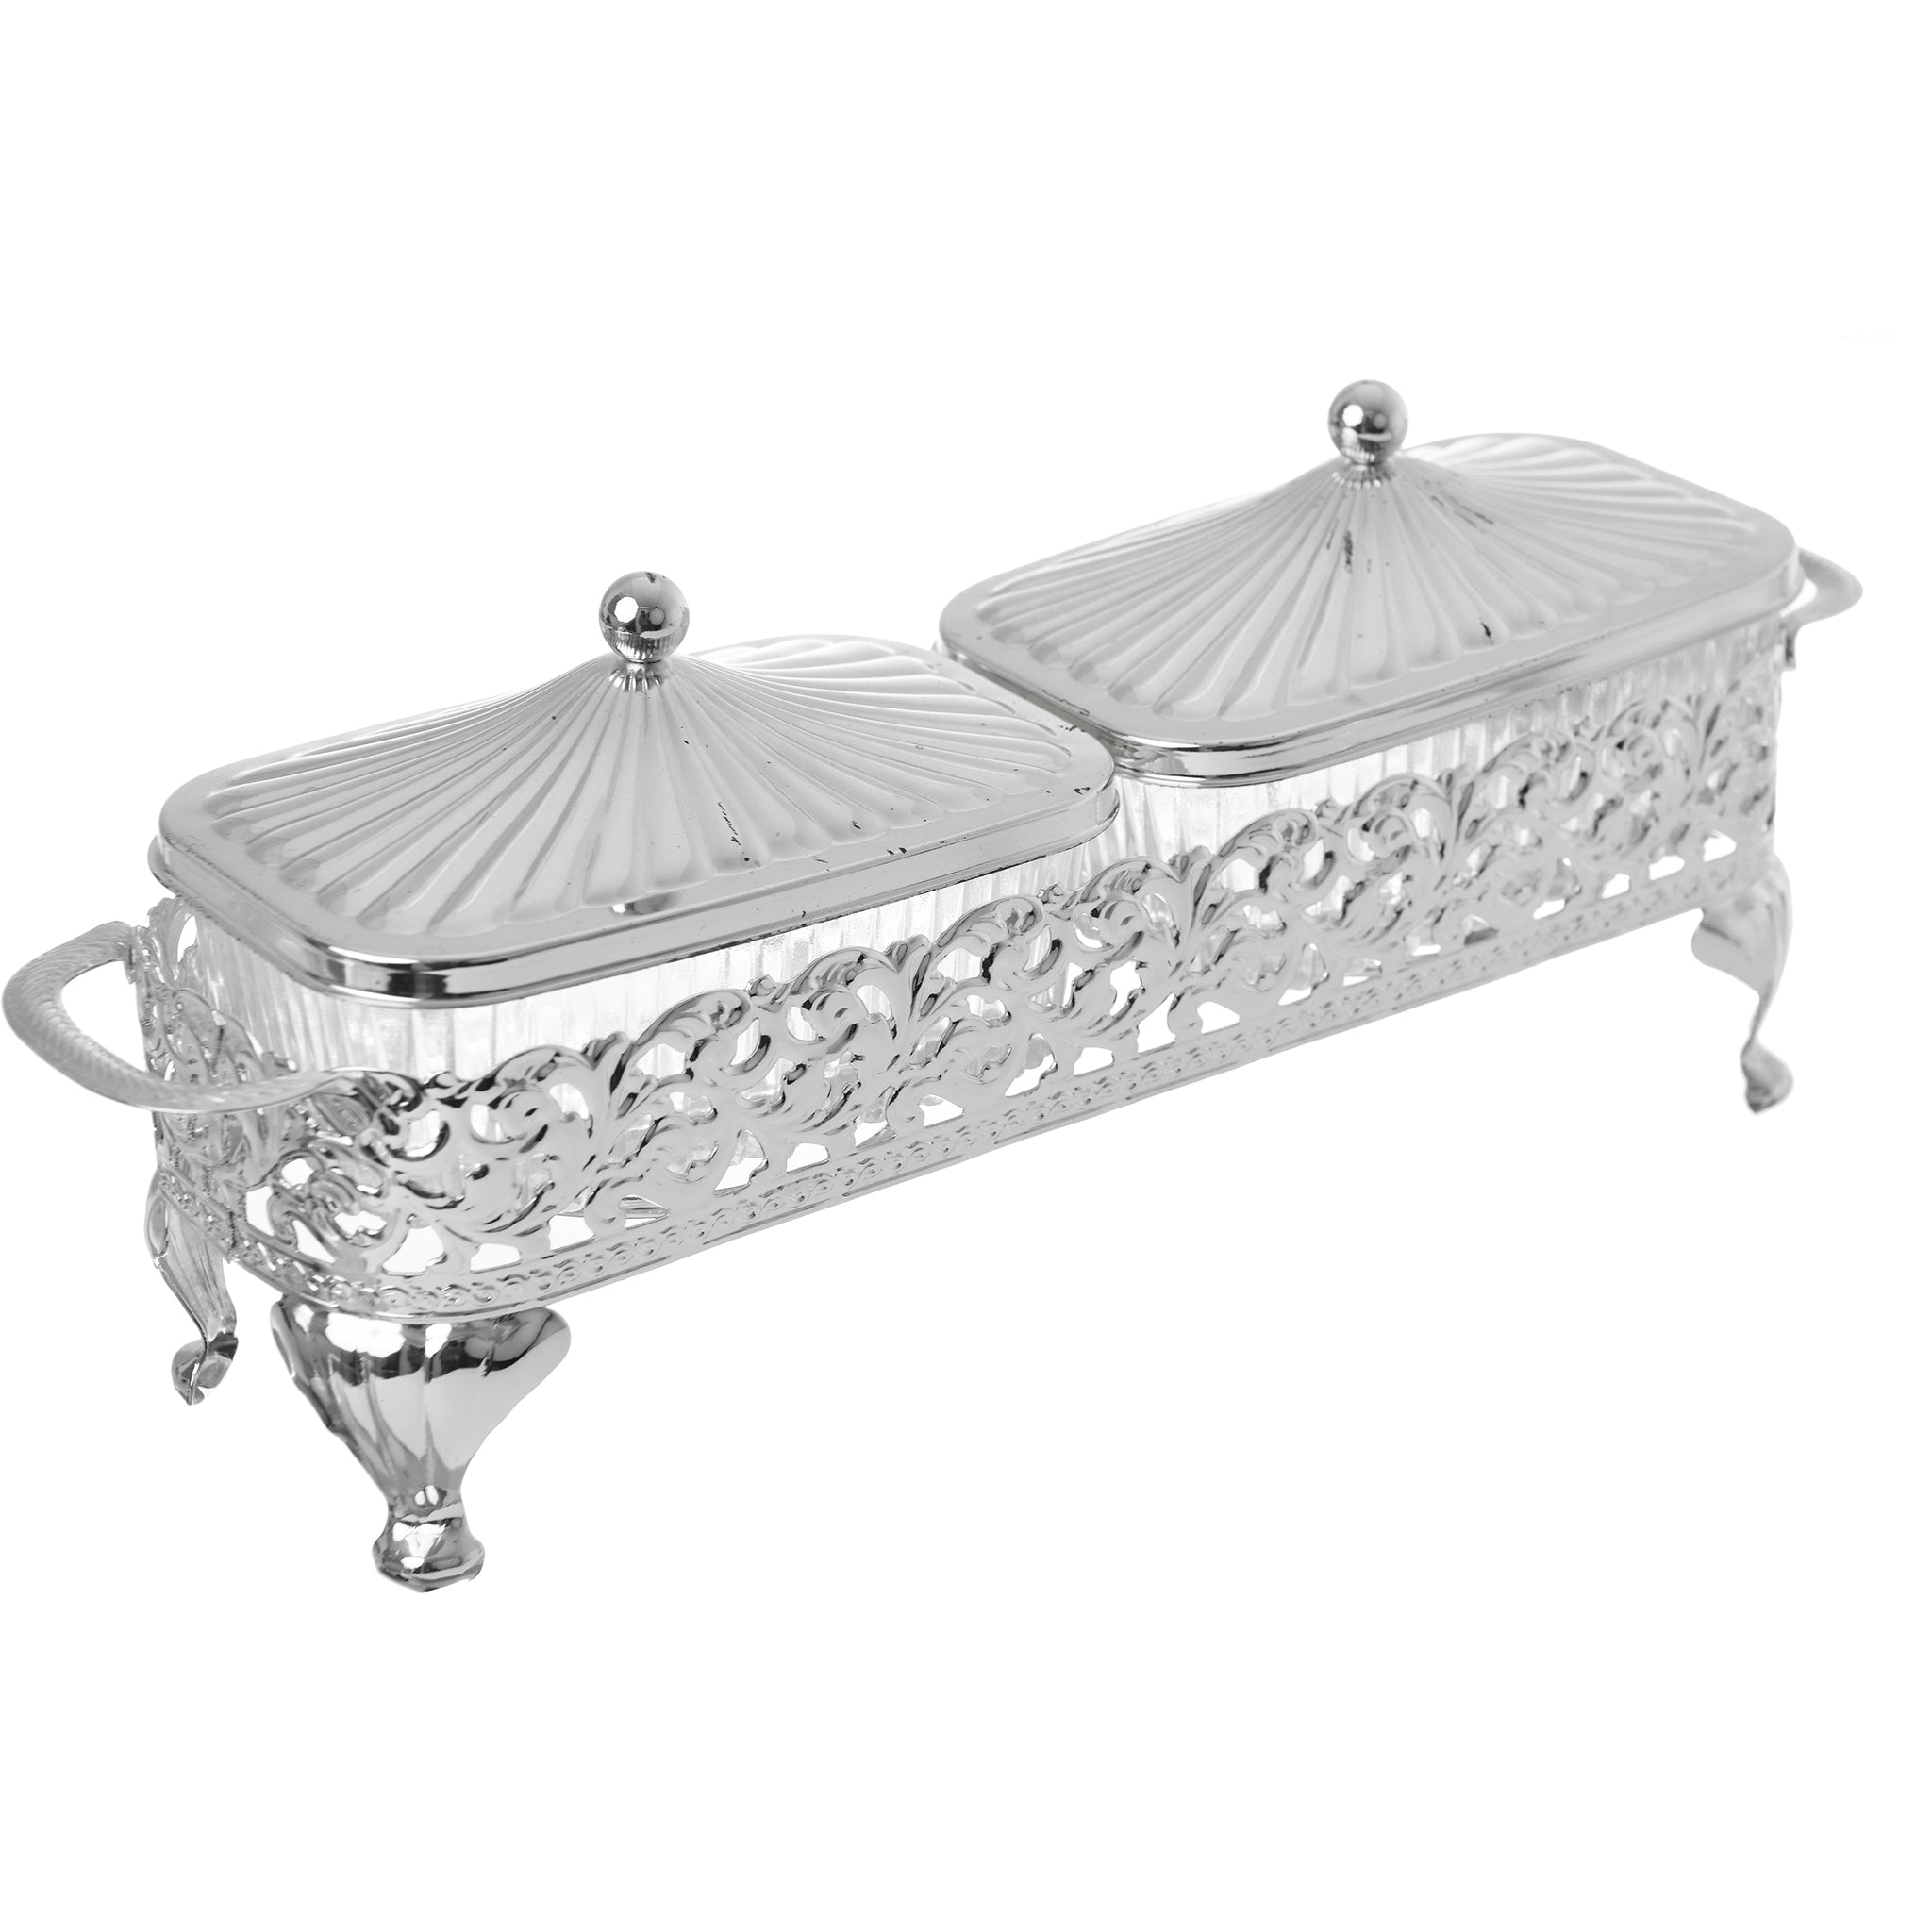 Queen Anne - Rectangular Bowl Set with Silver Plated Stand 2 Pieces - Silver Plated Metal & Glass - 29x9cm - 26000425